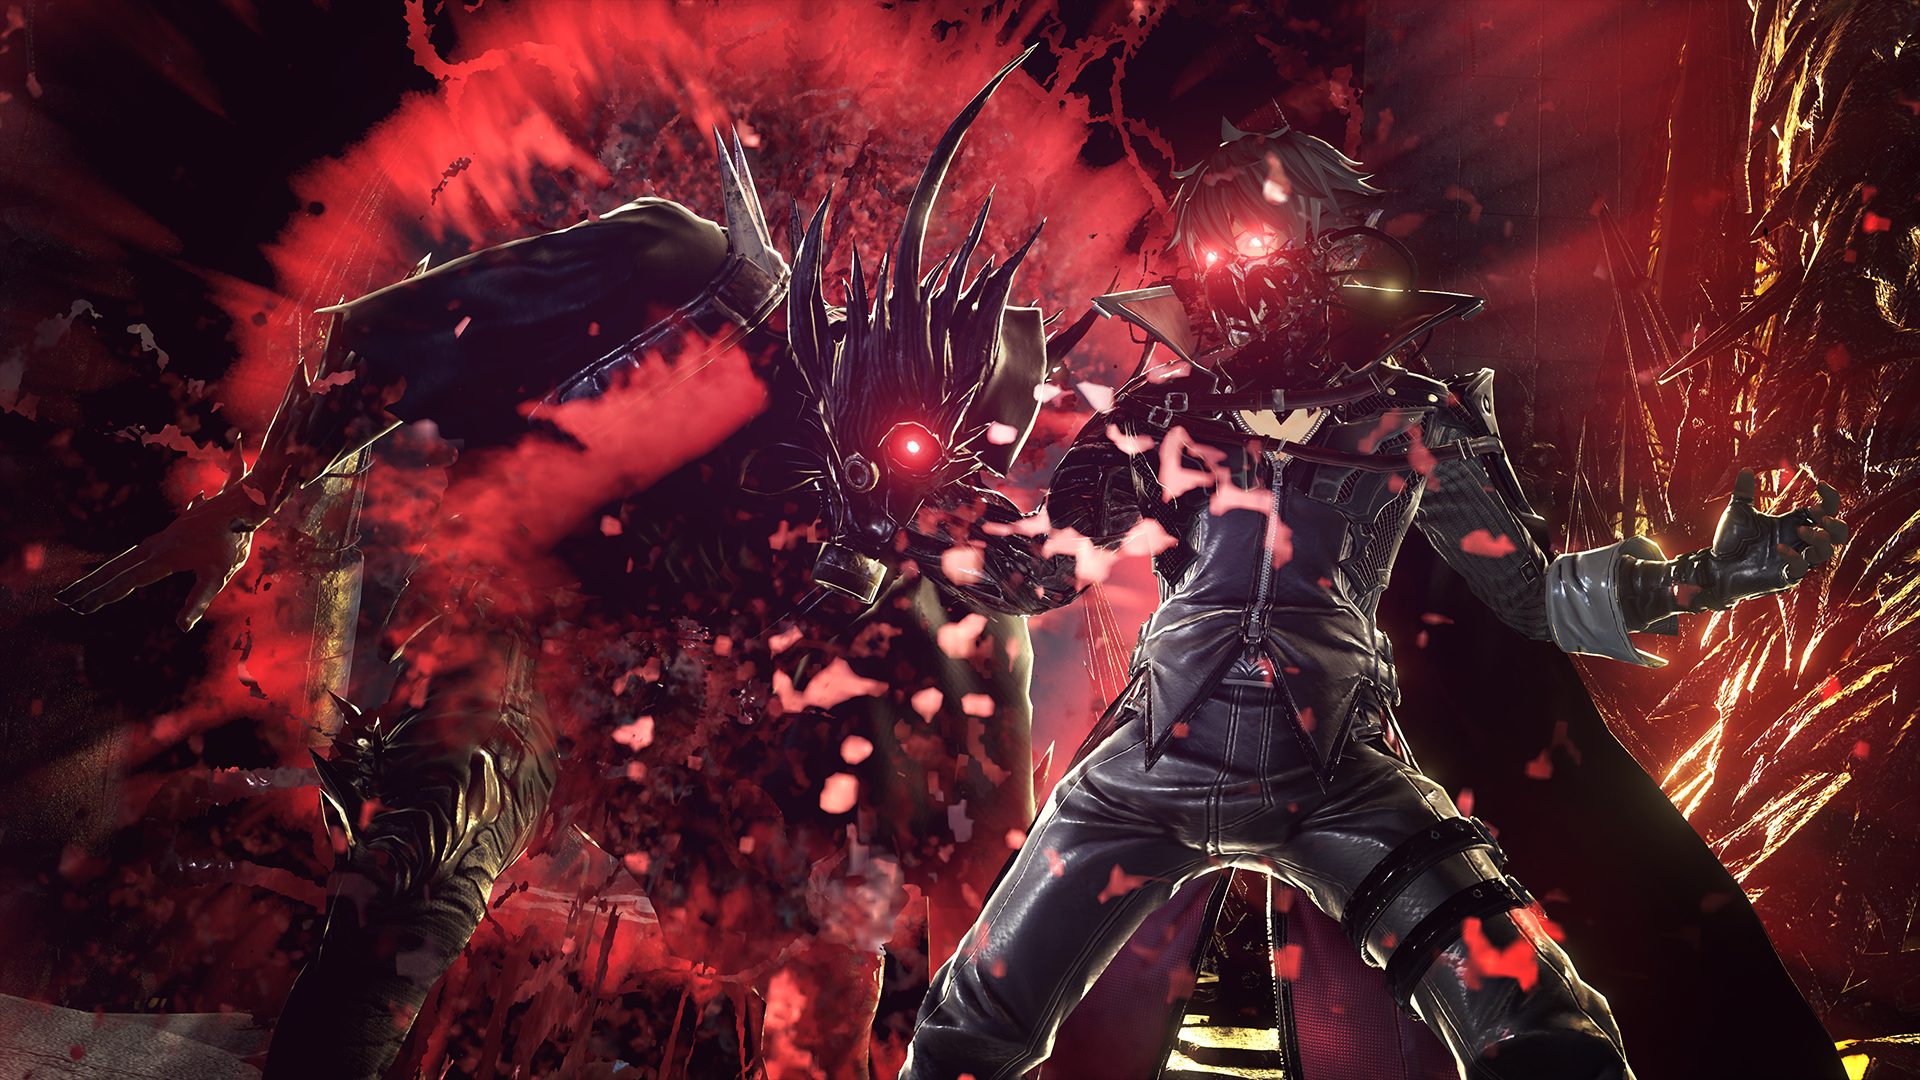 Here’s out first look at Bandai Namco’s new action RPG ‘Code Vein’